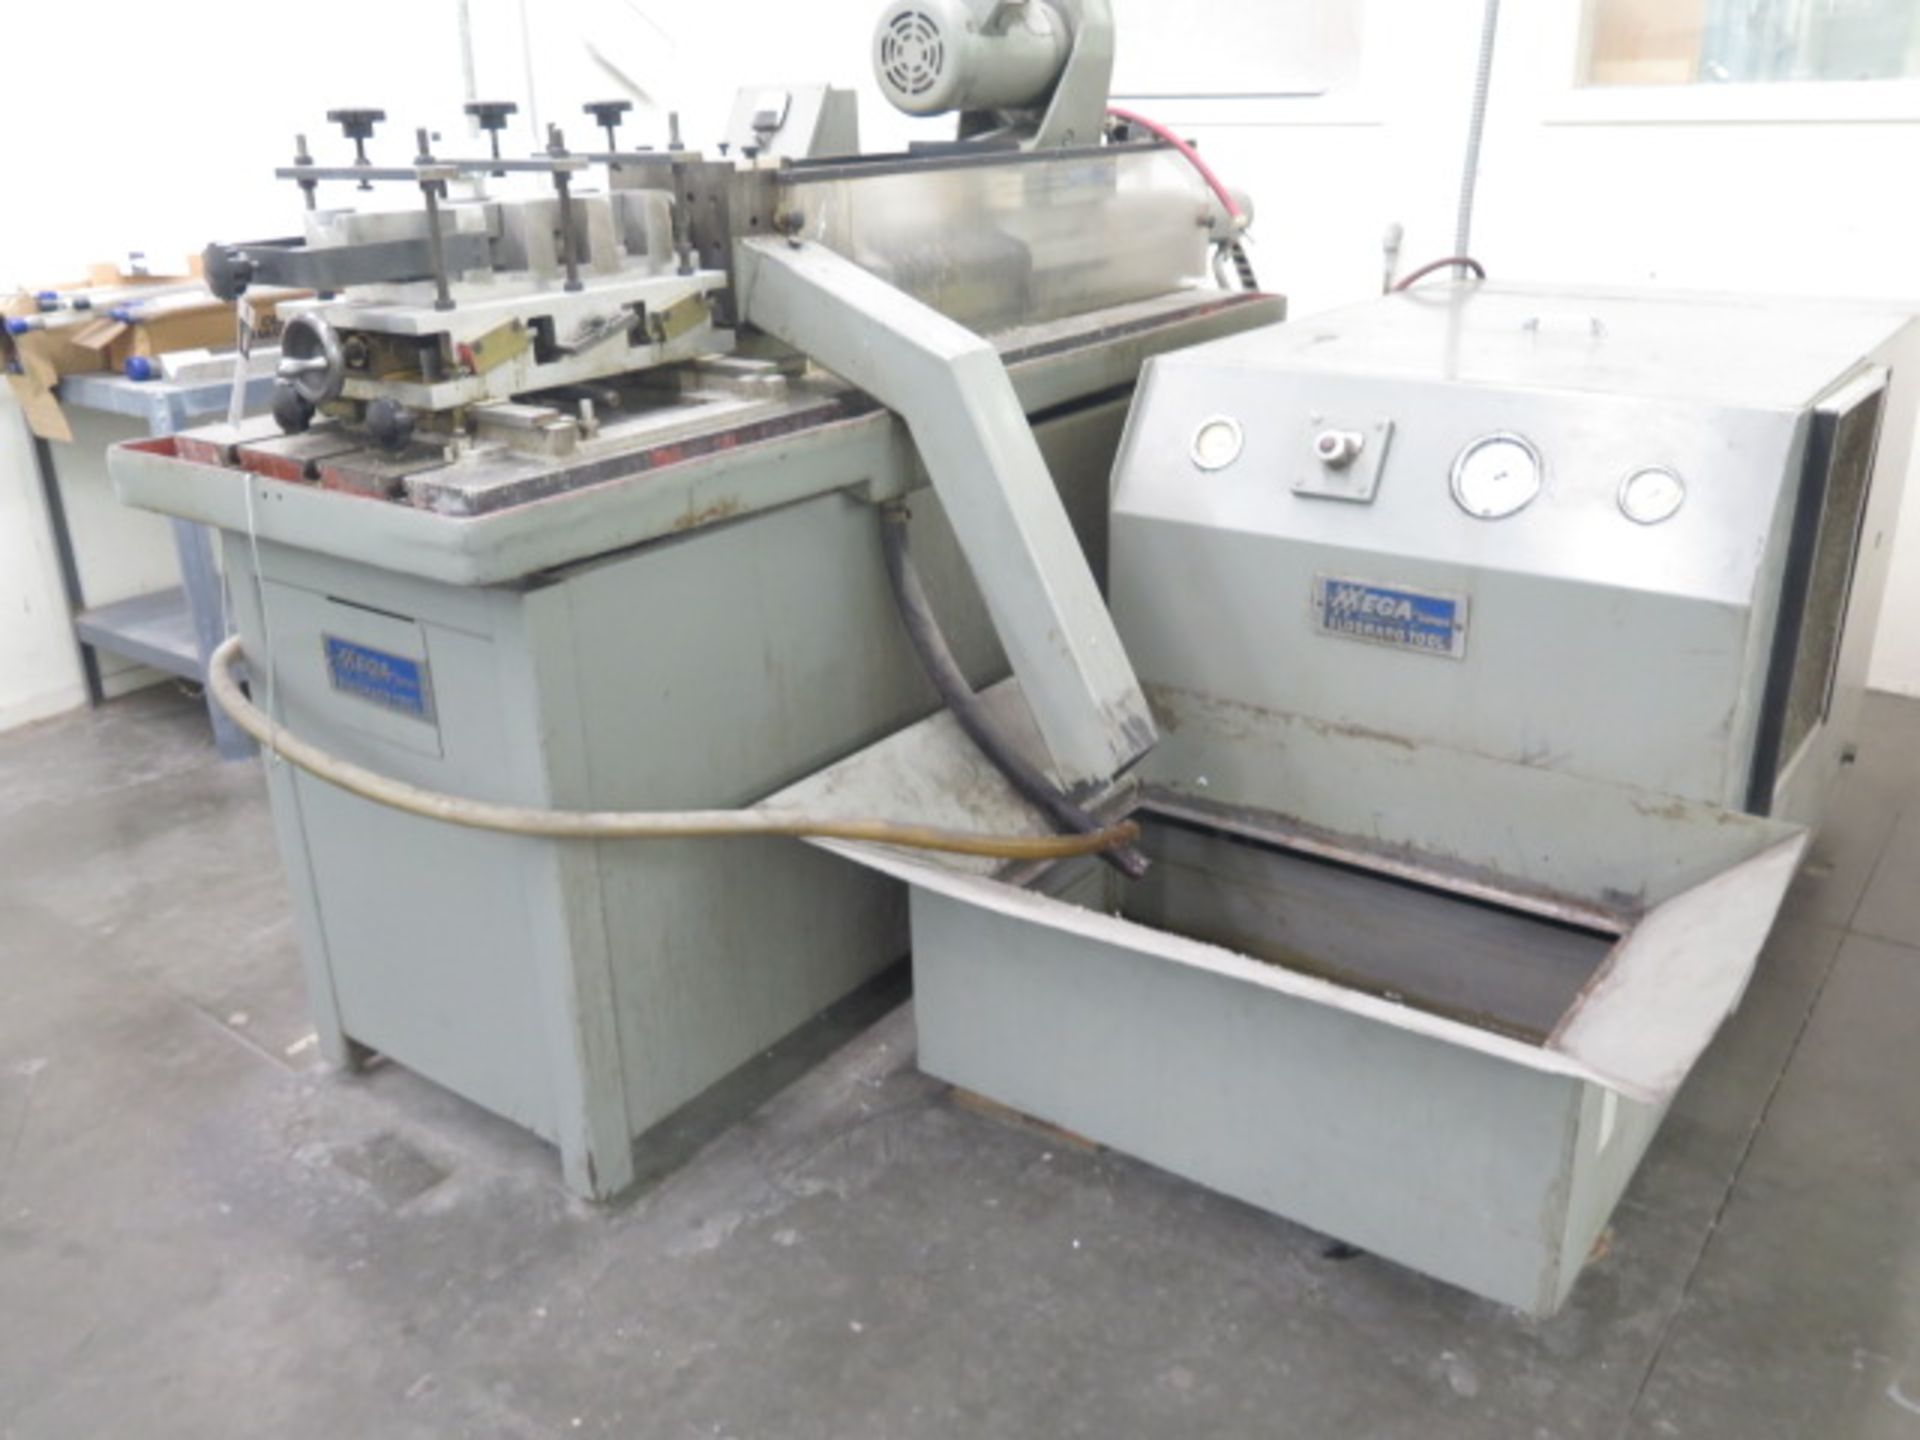 Mega Eldorado M75 1041 Gun Drilling Machine s/n 693 w/ Coolant and Filtration System SOLD AS-IS - Image 3 of 11